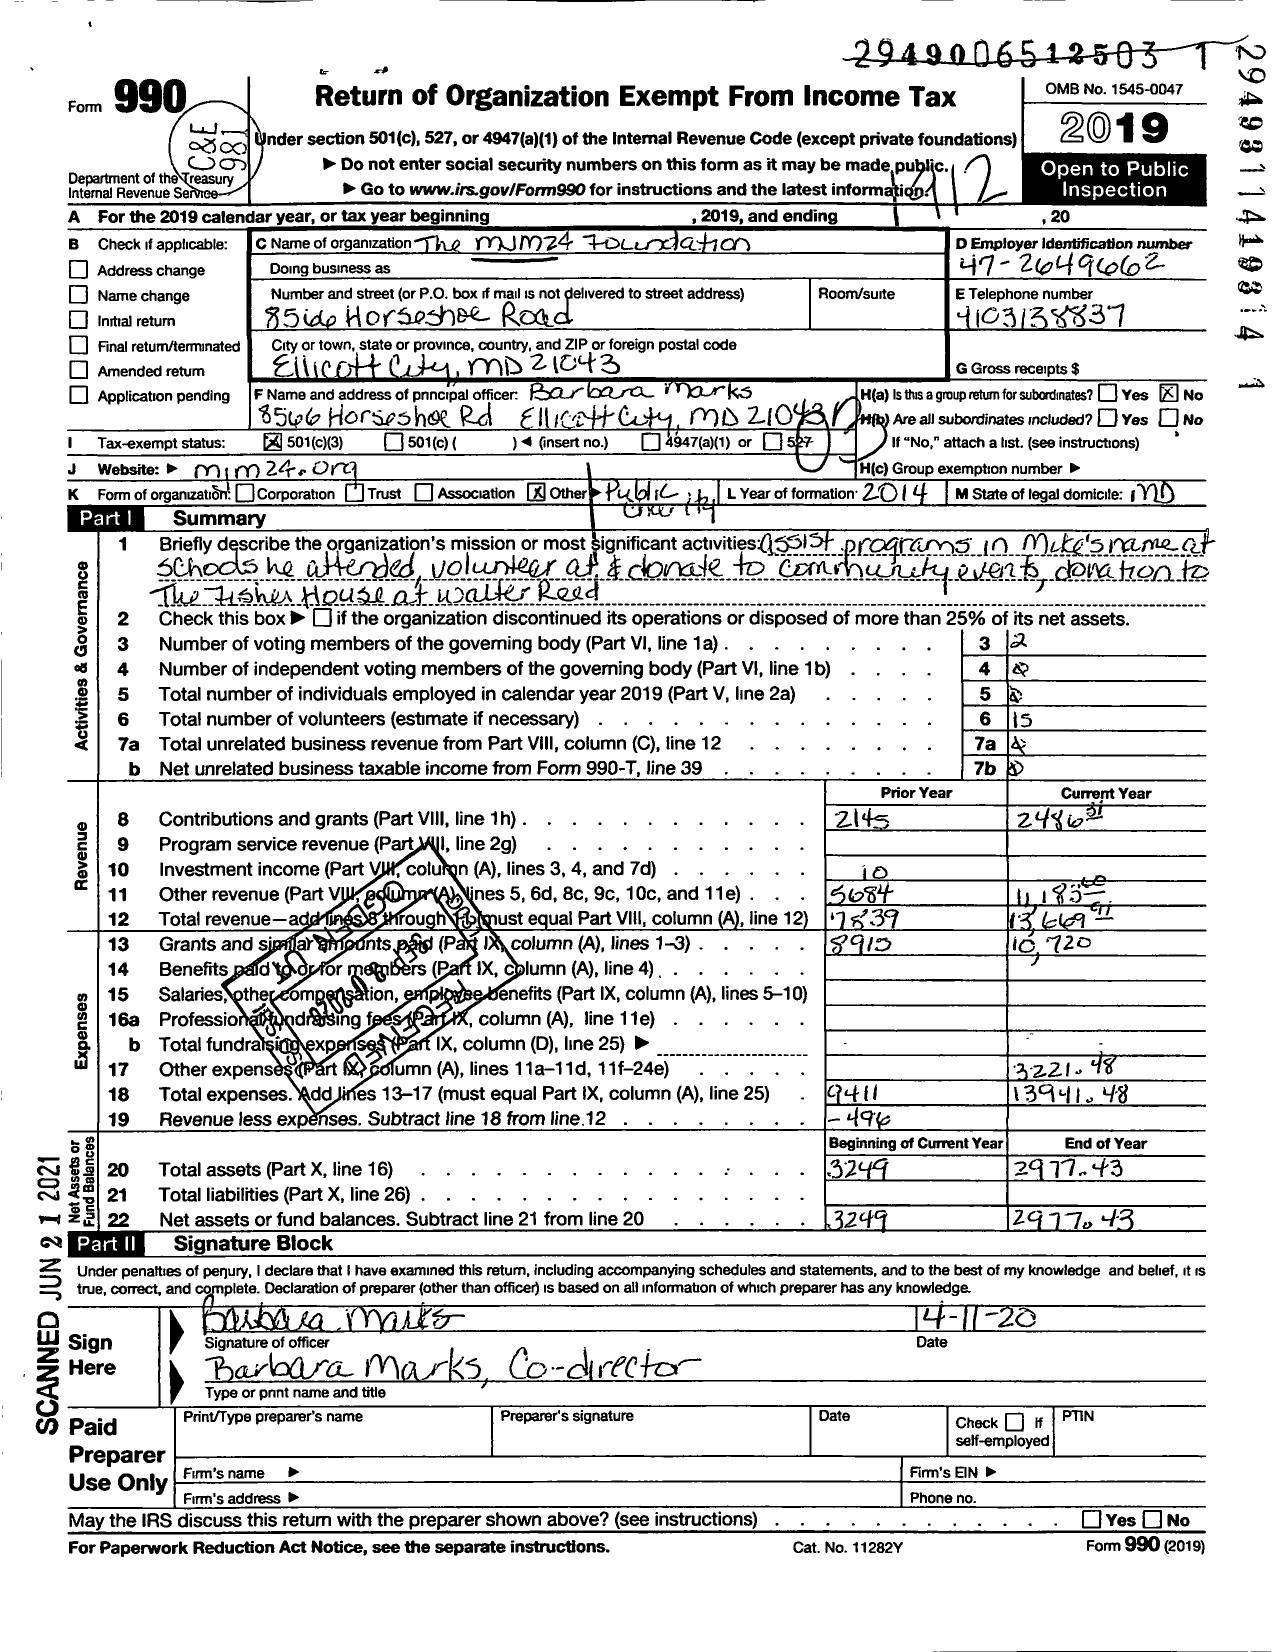 Image of first page of 2019 Form 990 for MJM24 24 Foundation